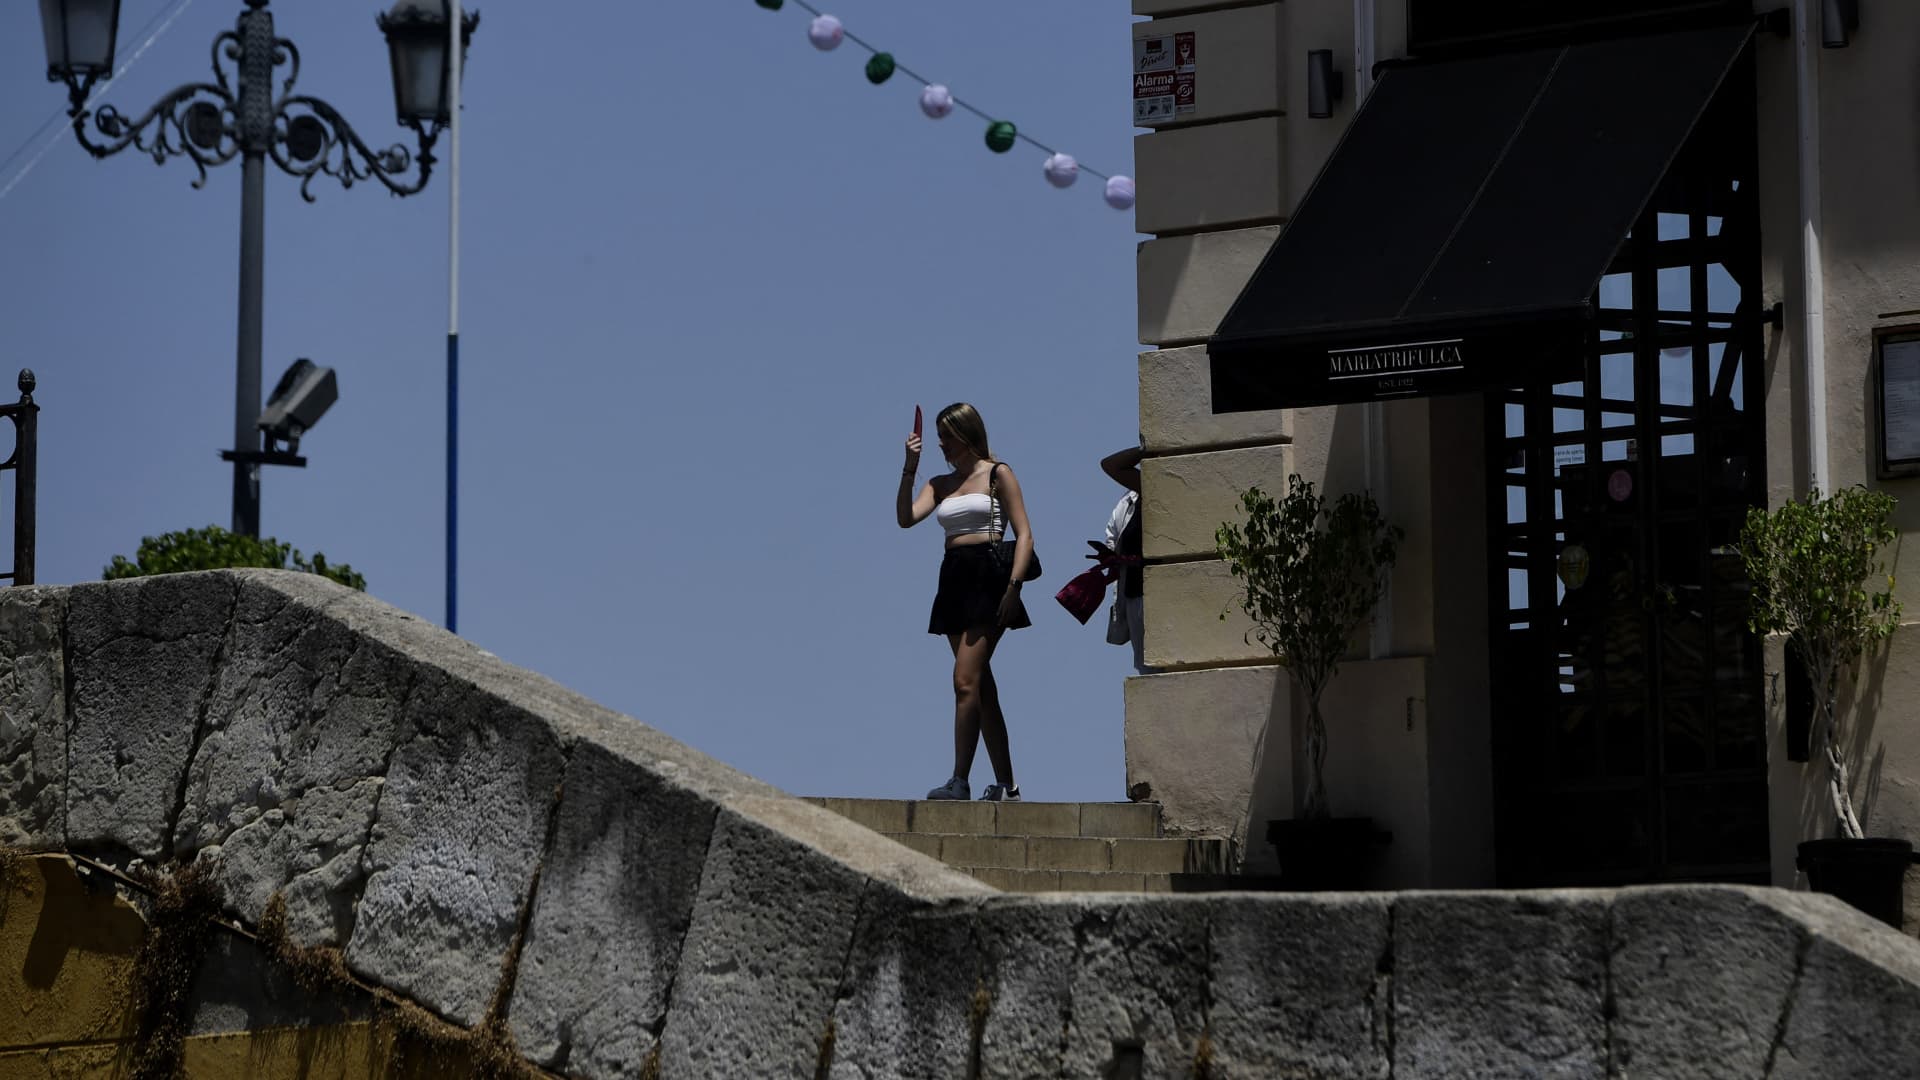 ‘The heat is relentless’: Scorching temperatures bring misery to daily life in Spain